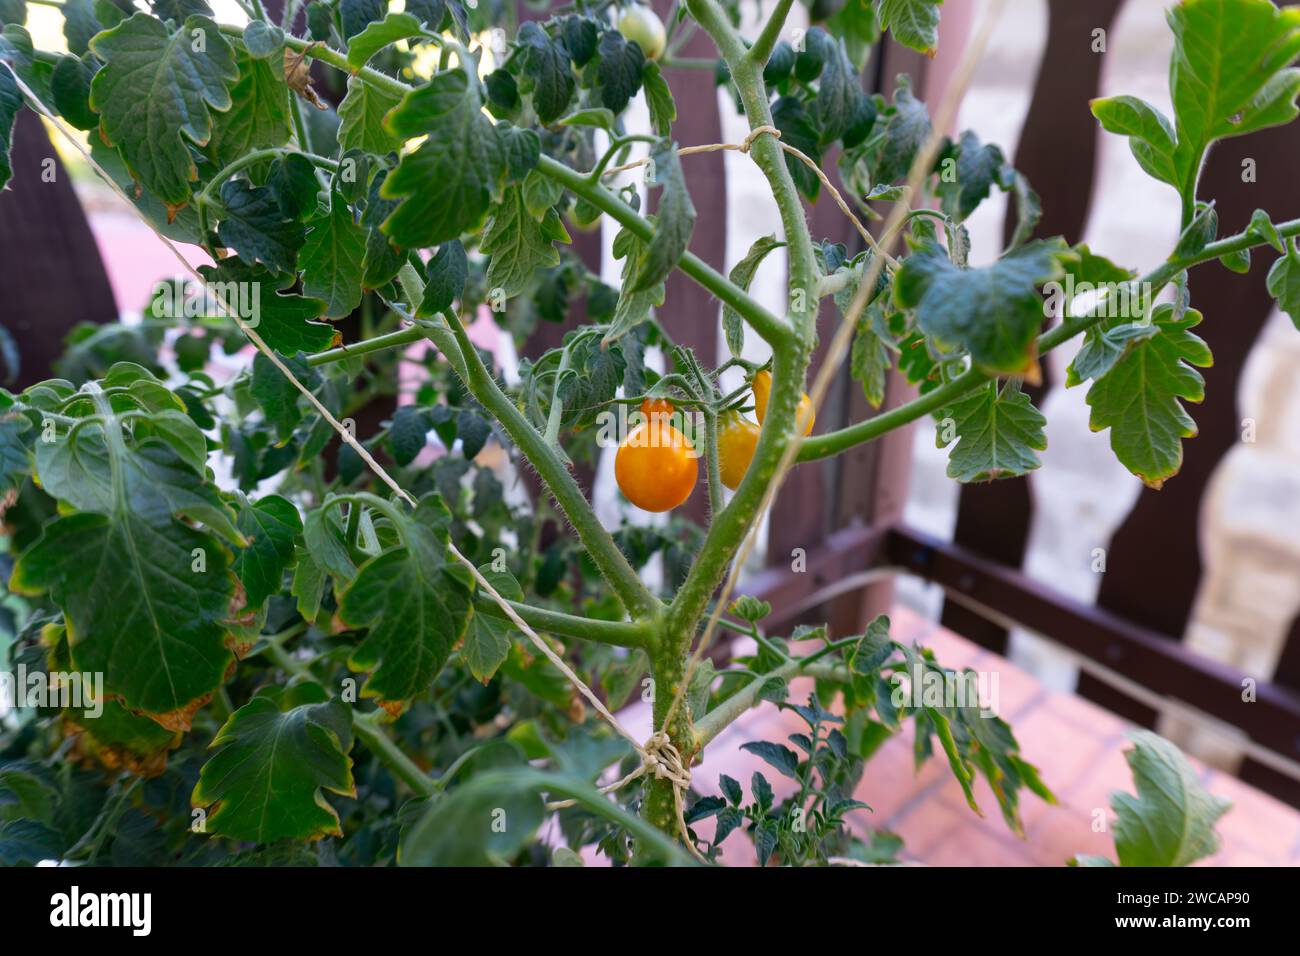 A close up of a tomato plant with lush green leaves and vibrant yellow and orange tomatoes Stock Photo